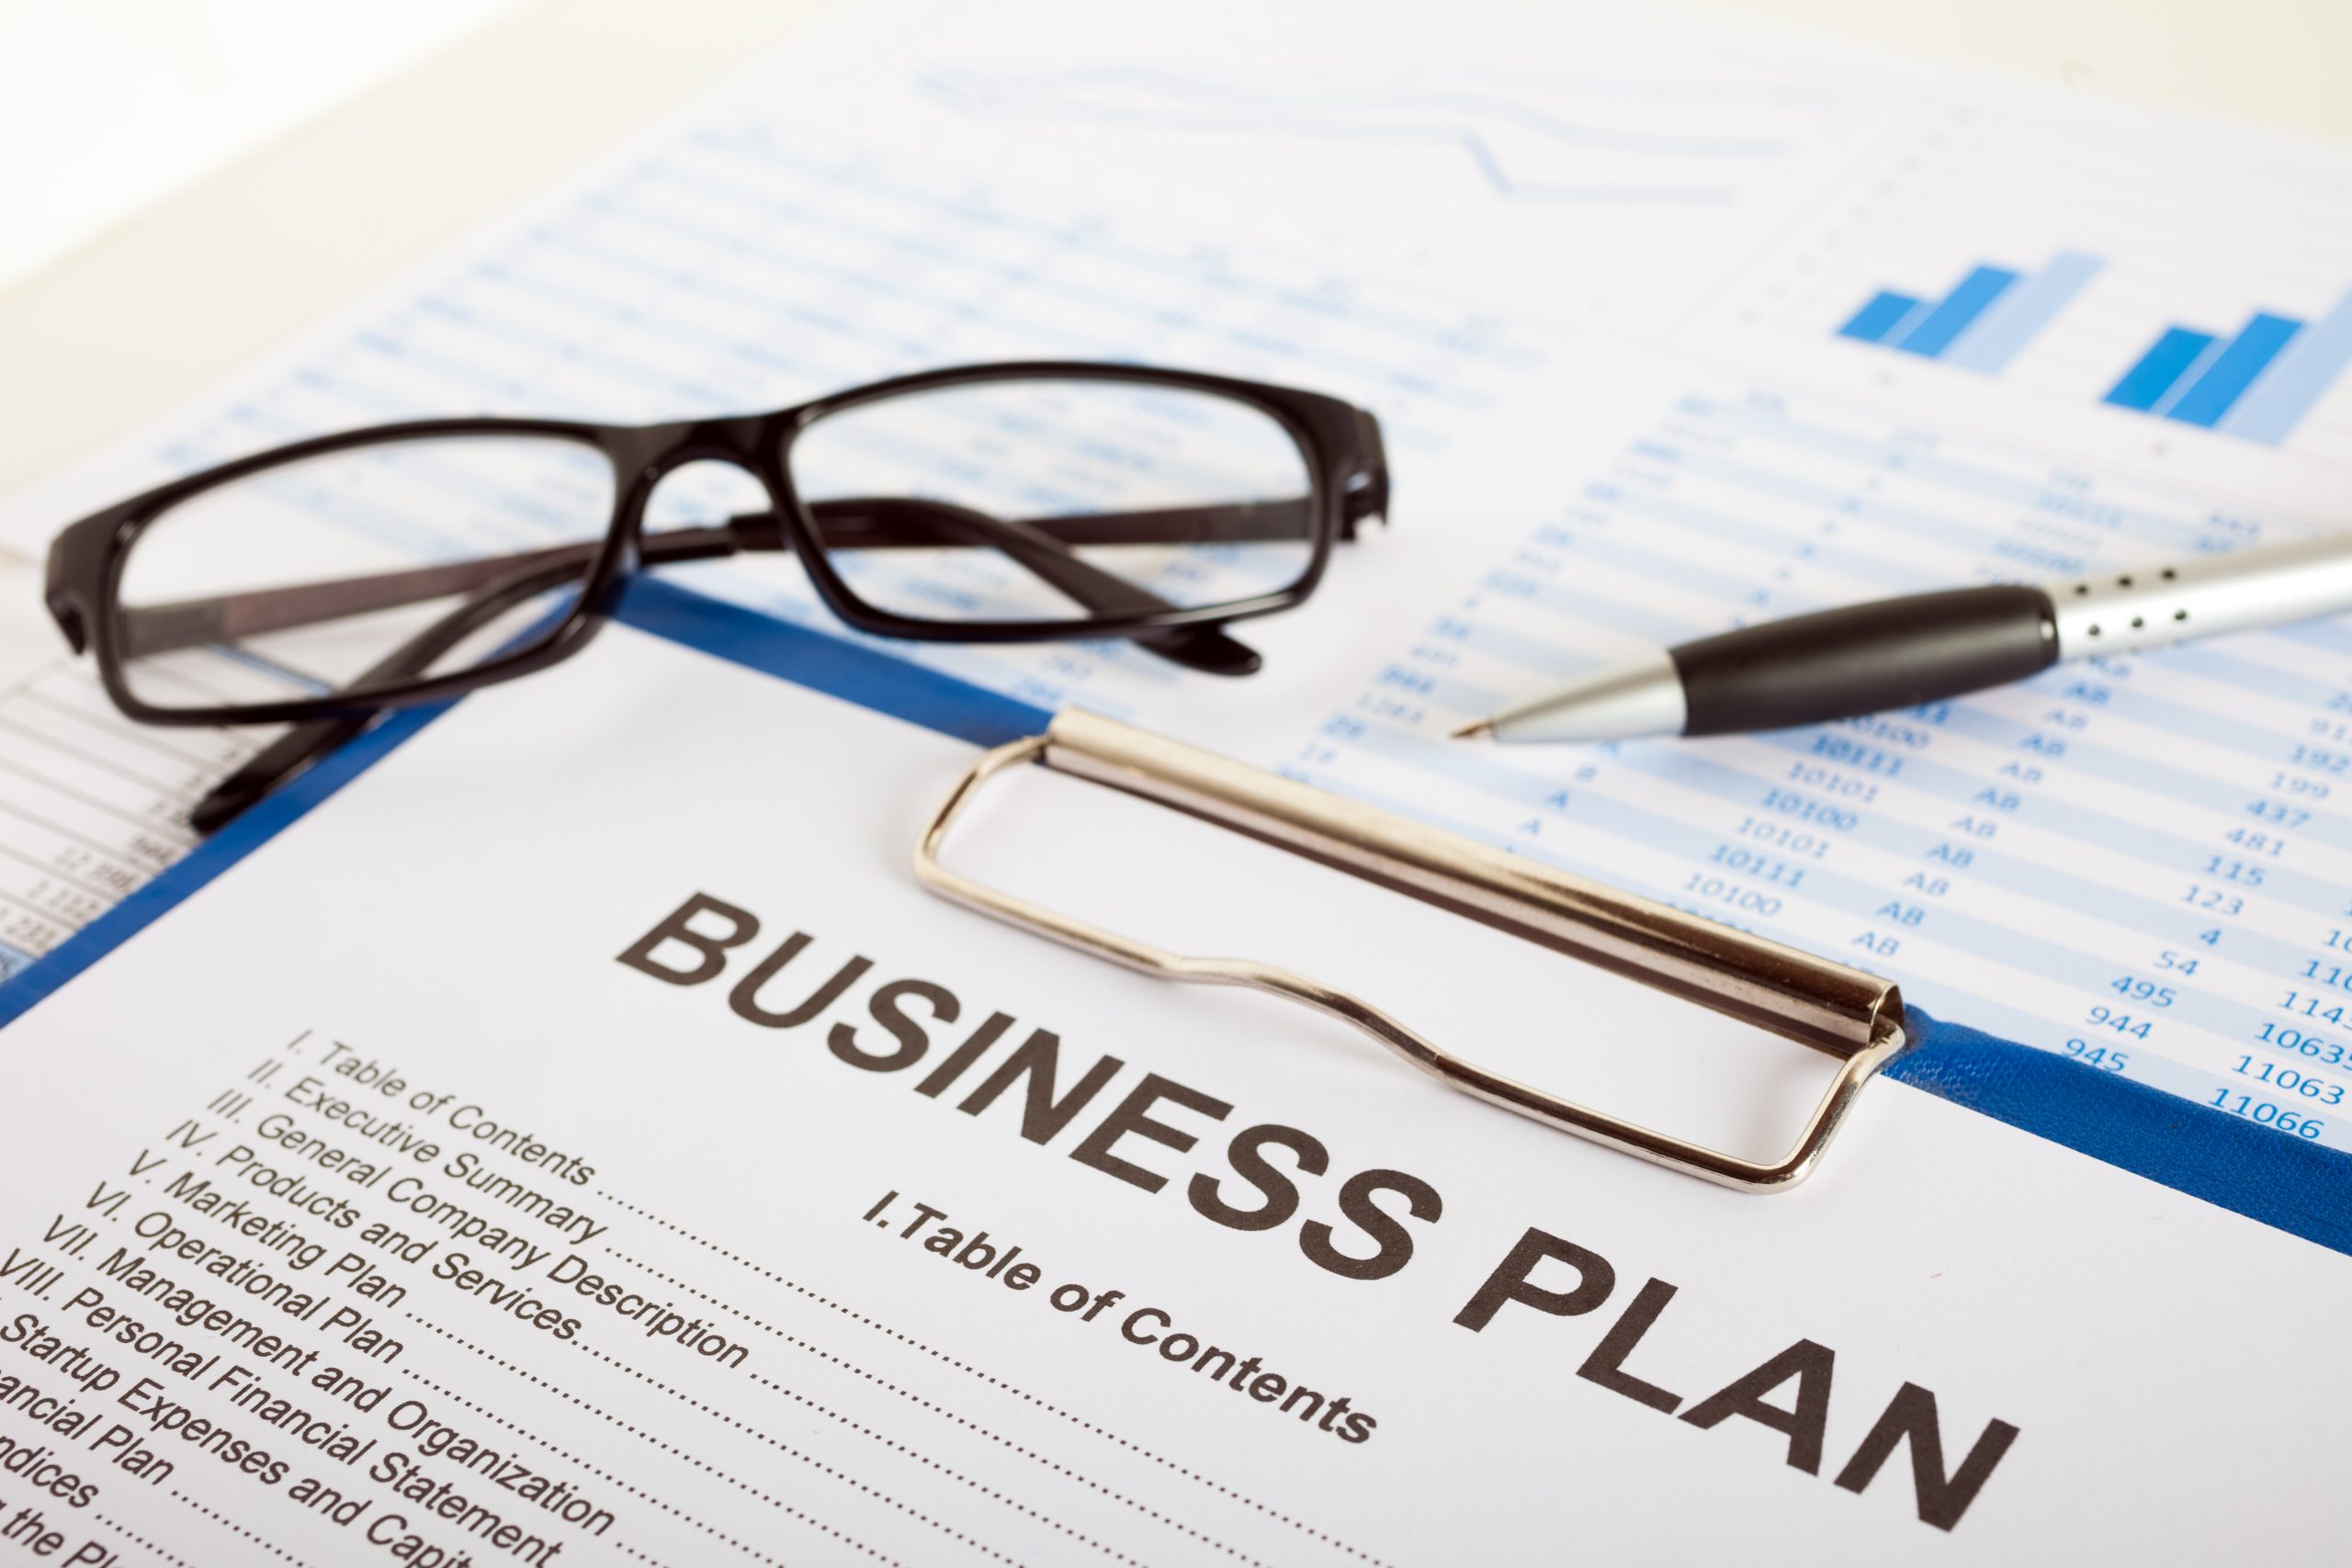 How to Write a Business Plan for Beginners